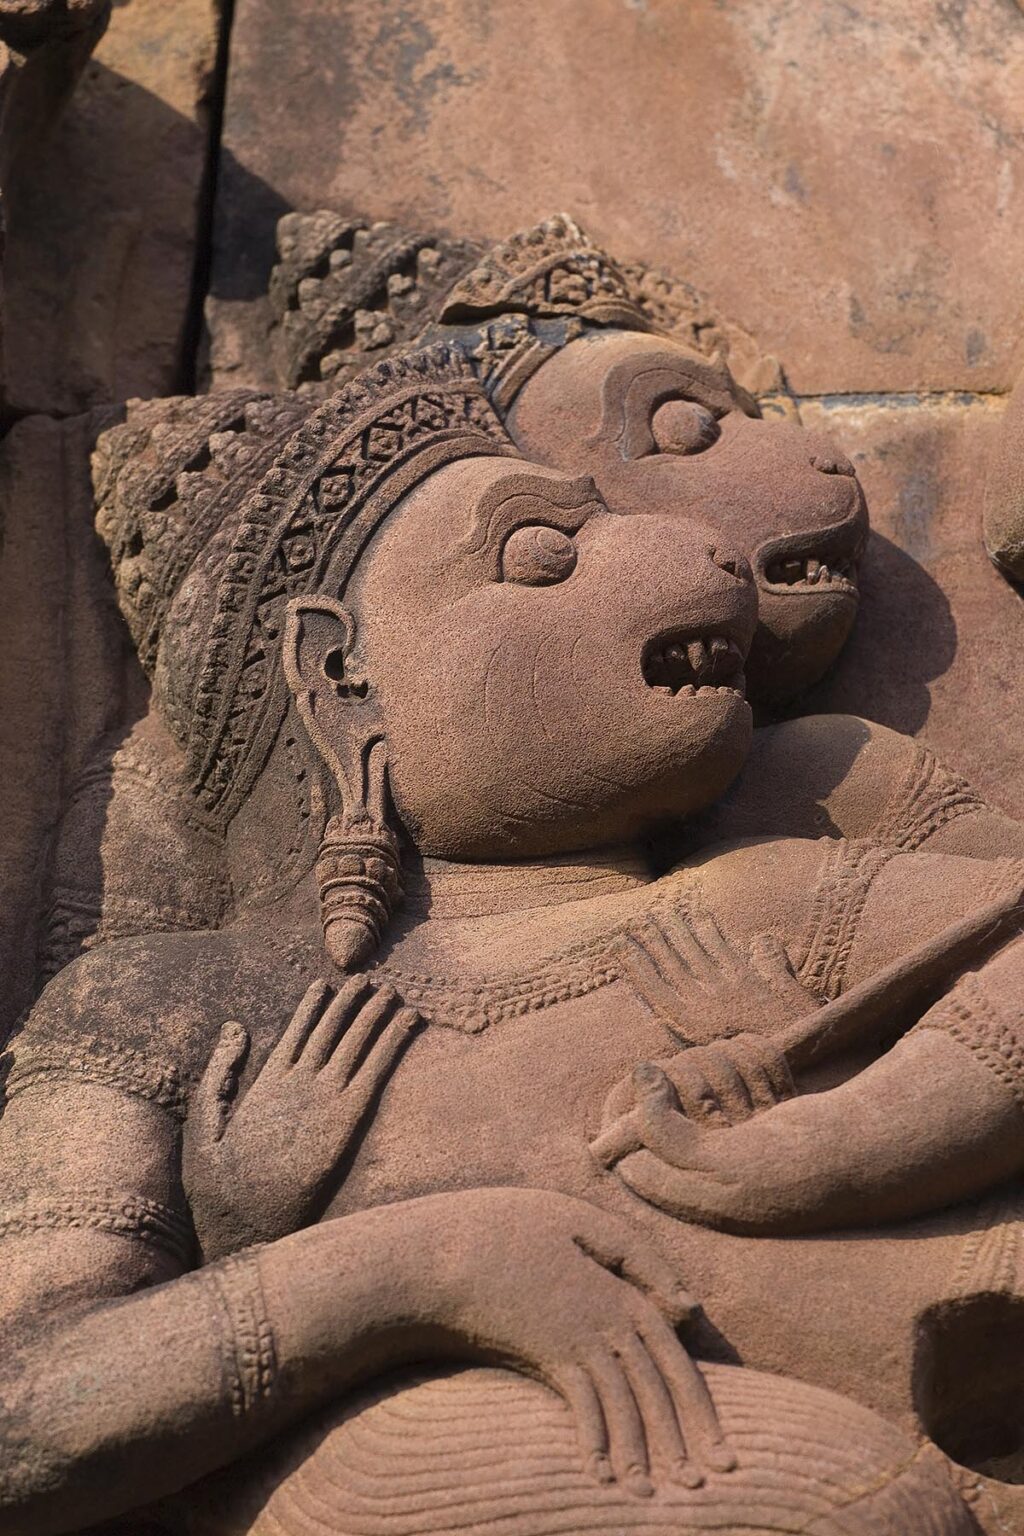 Bas relief detail in red sandstone of the W Pediment of the Gopura 1 W at Banteay Srei, 10th century Khmer architecture at Angkor Wat - Siem Reap, Cambodia